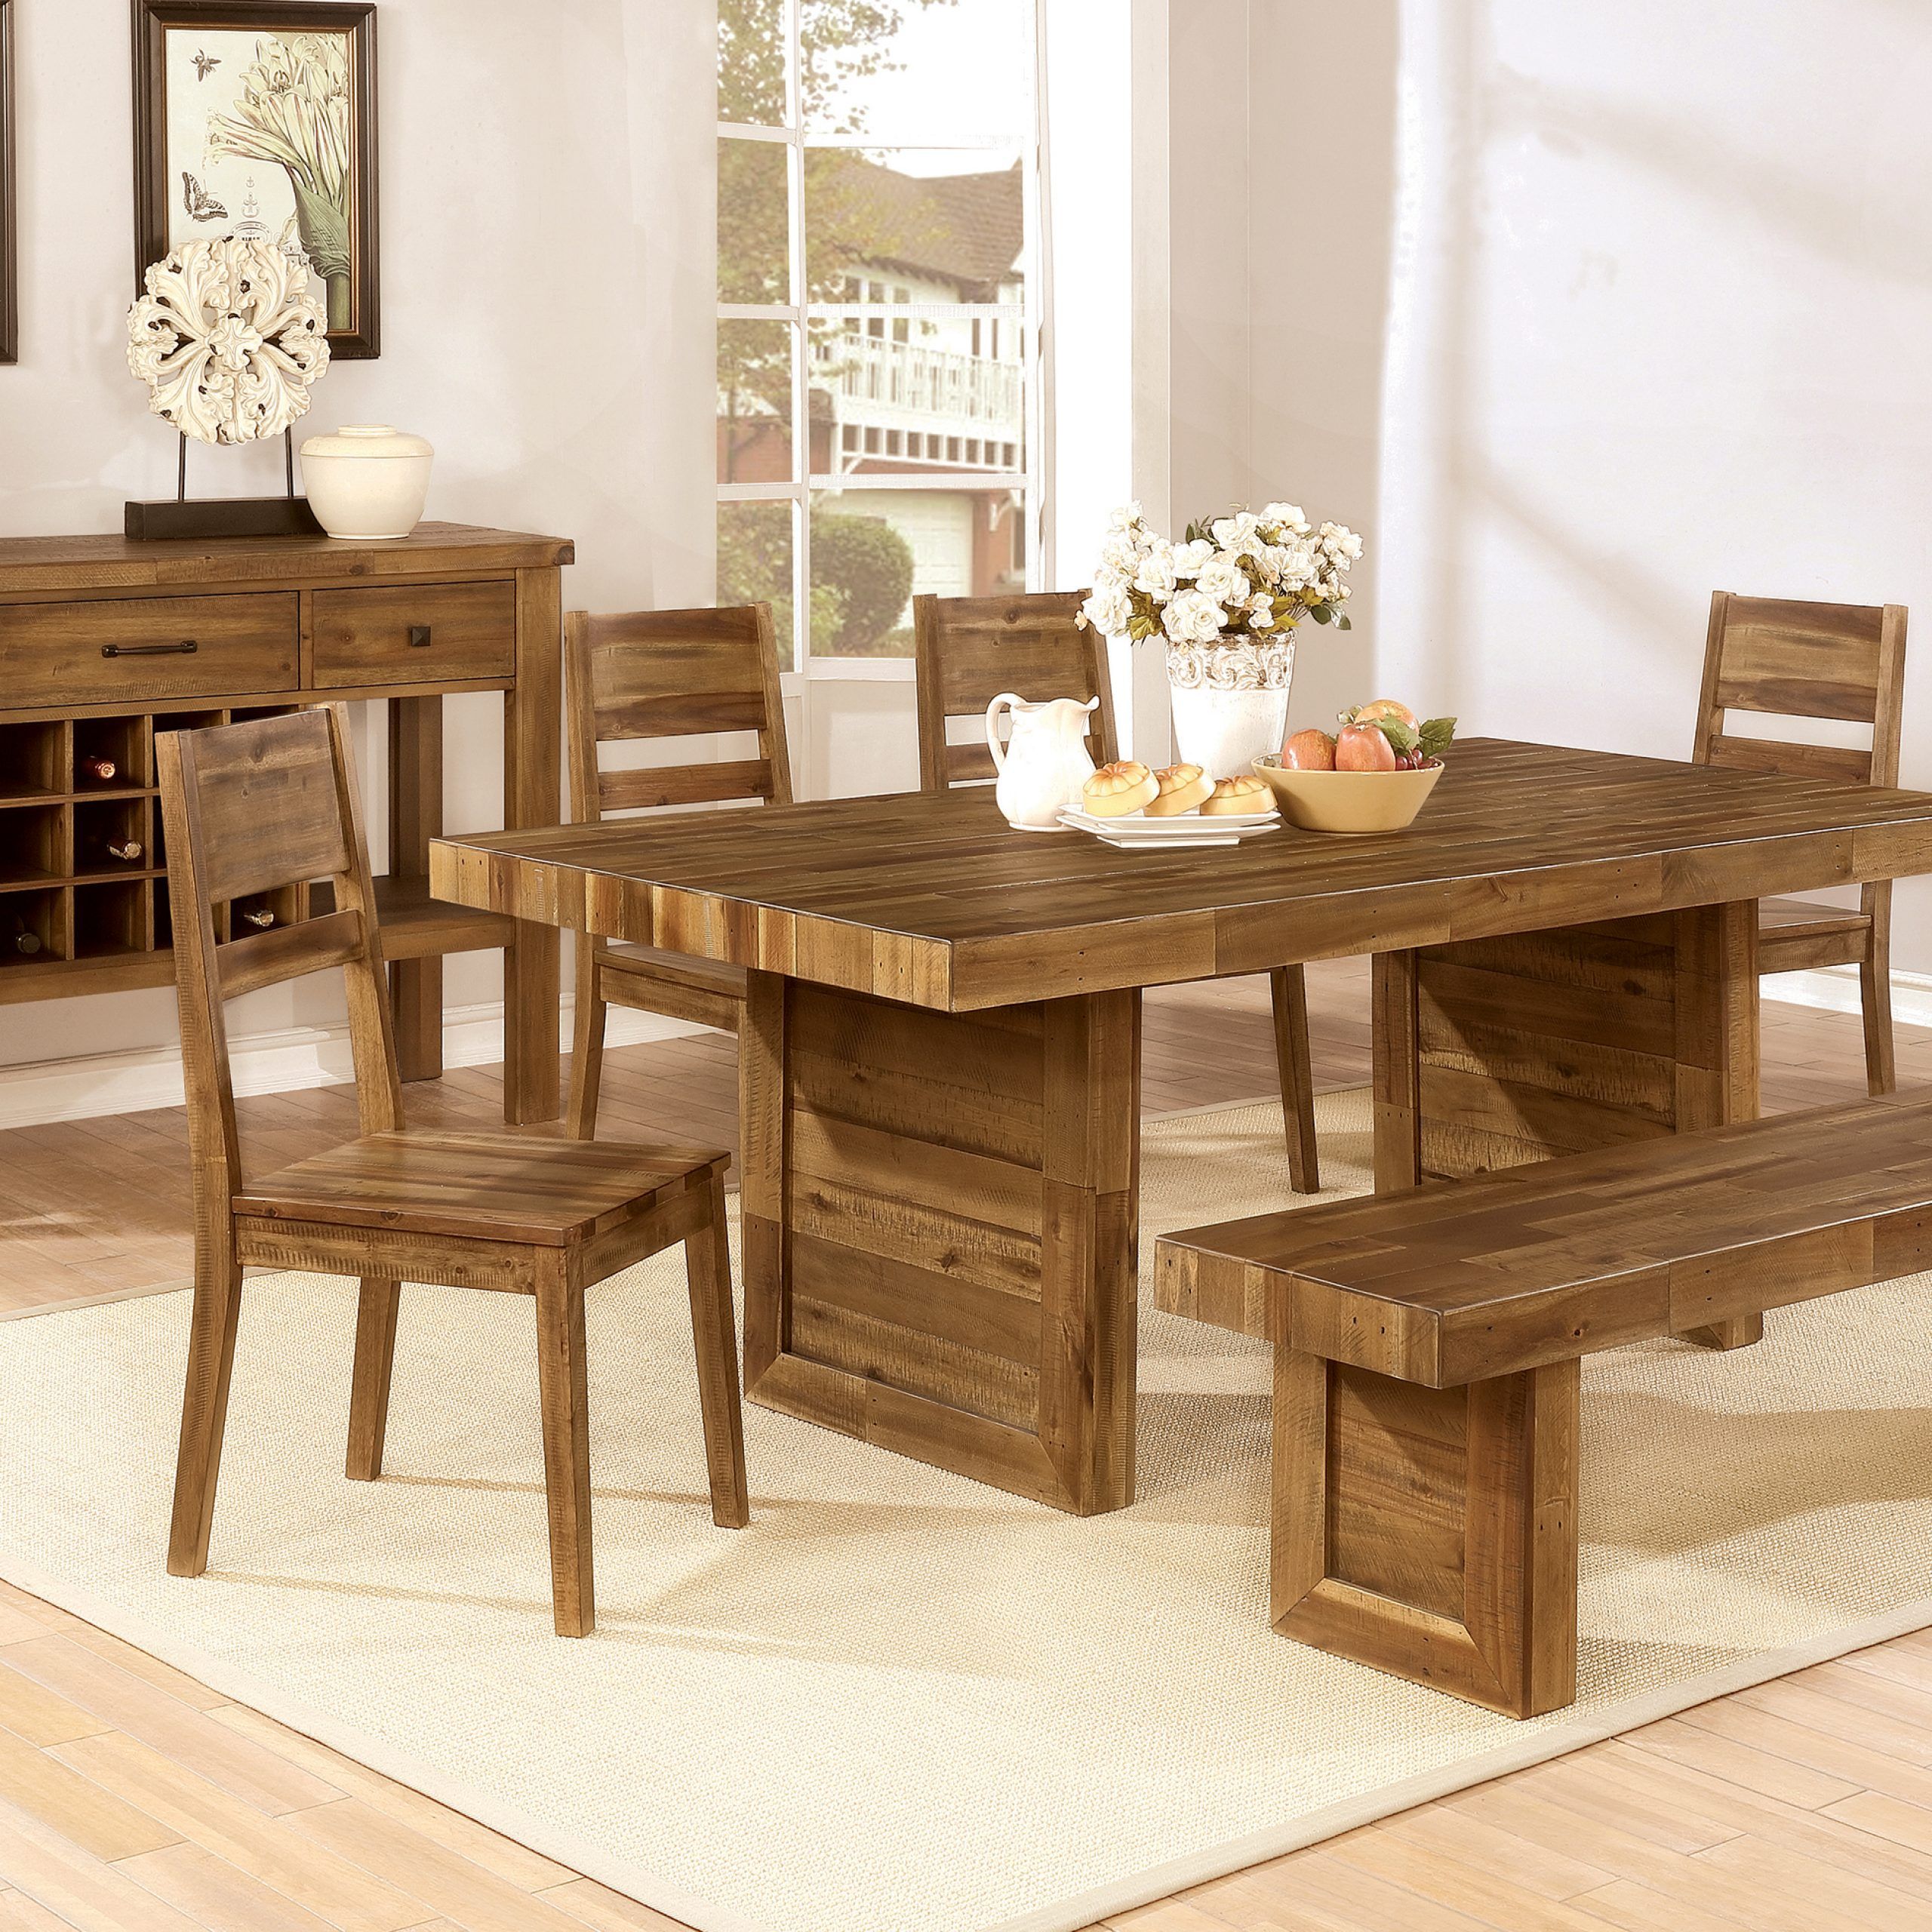 Tucson Rectangular Dining Table Varied Natural – Coaster For Favorite Coaster Contemporary 6 Seating Rectangular Casual Dining Tables (View 10 of 25)